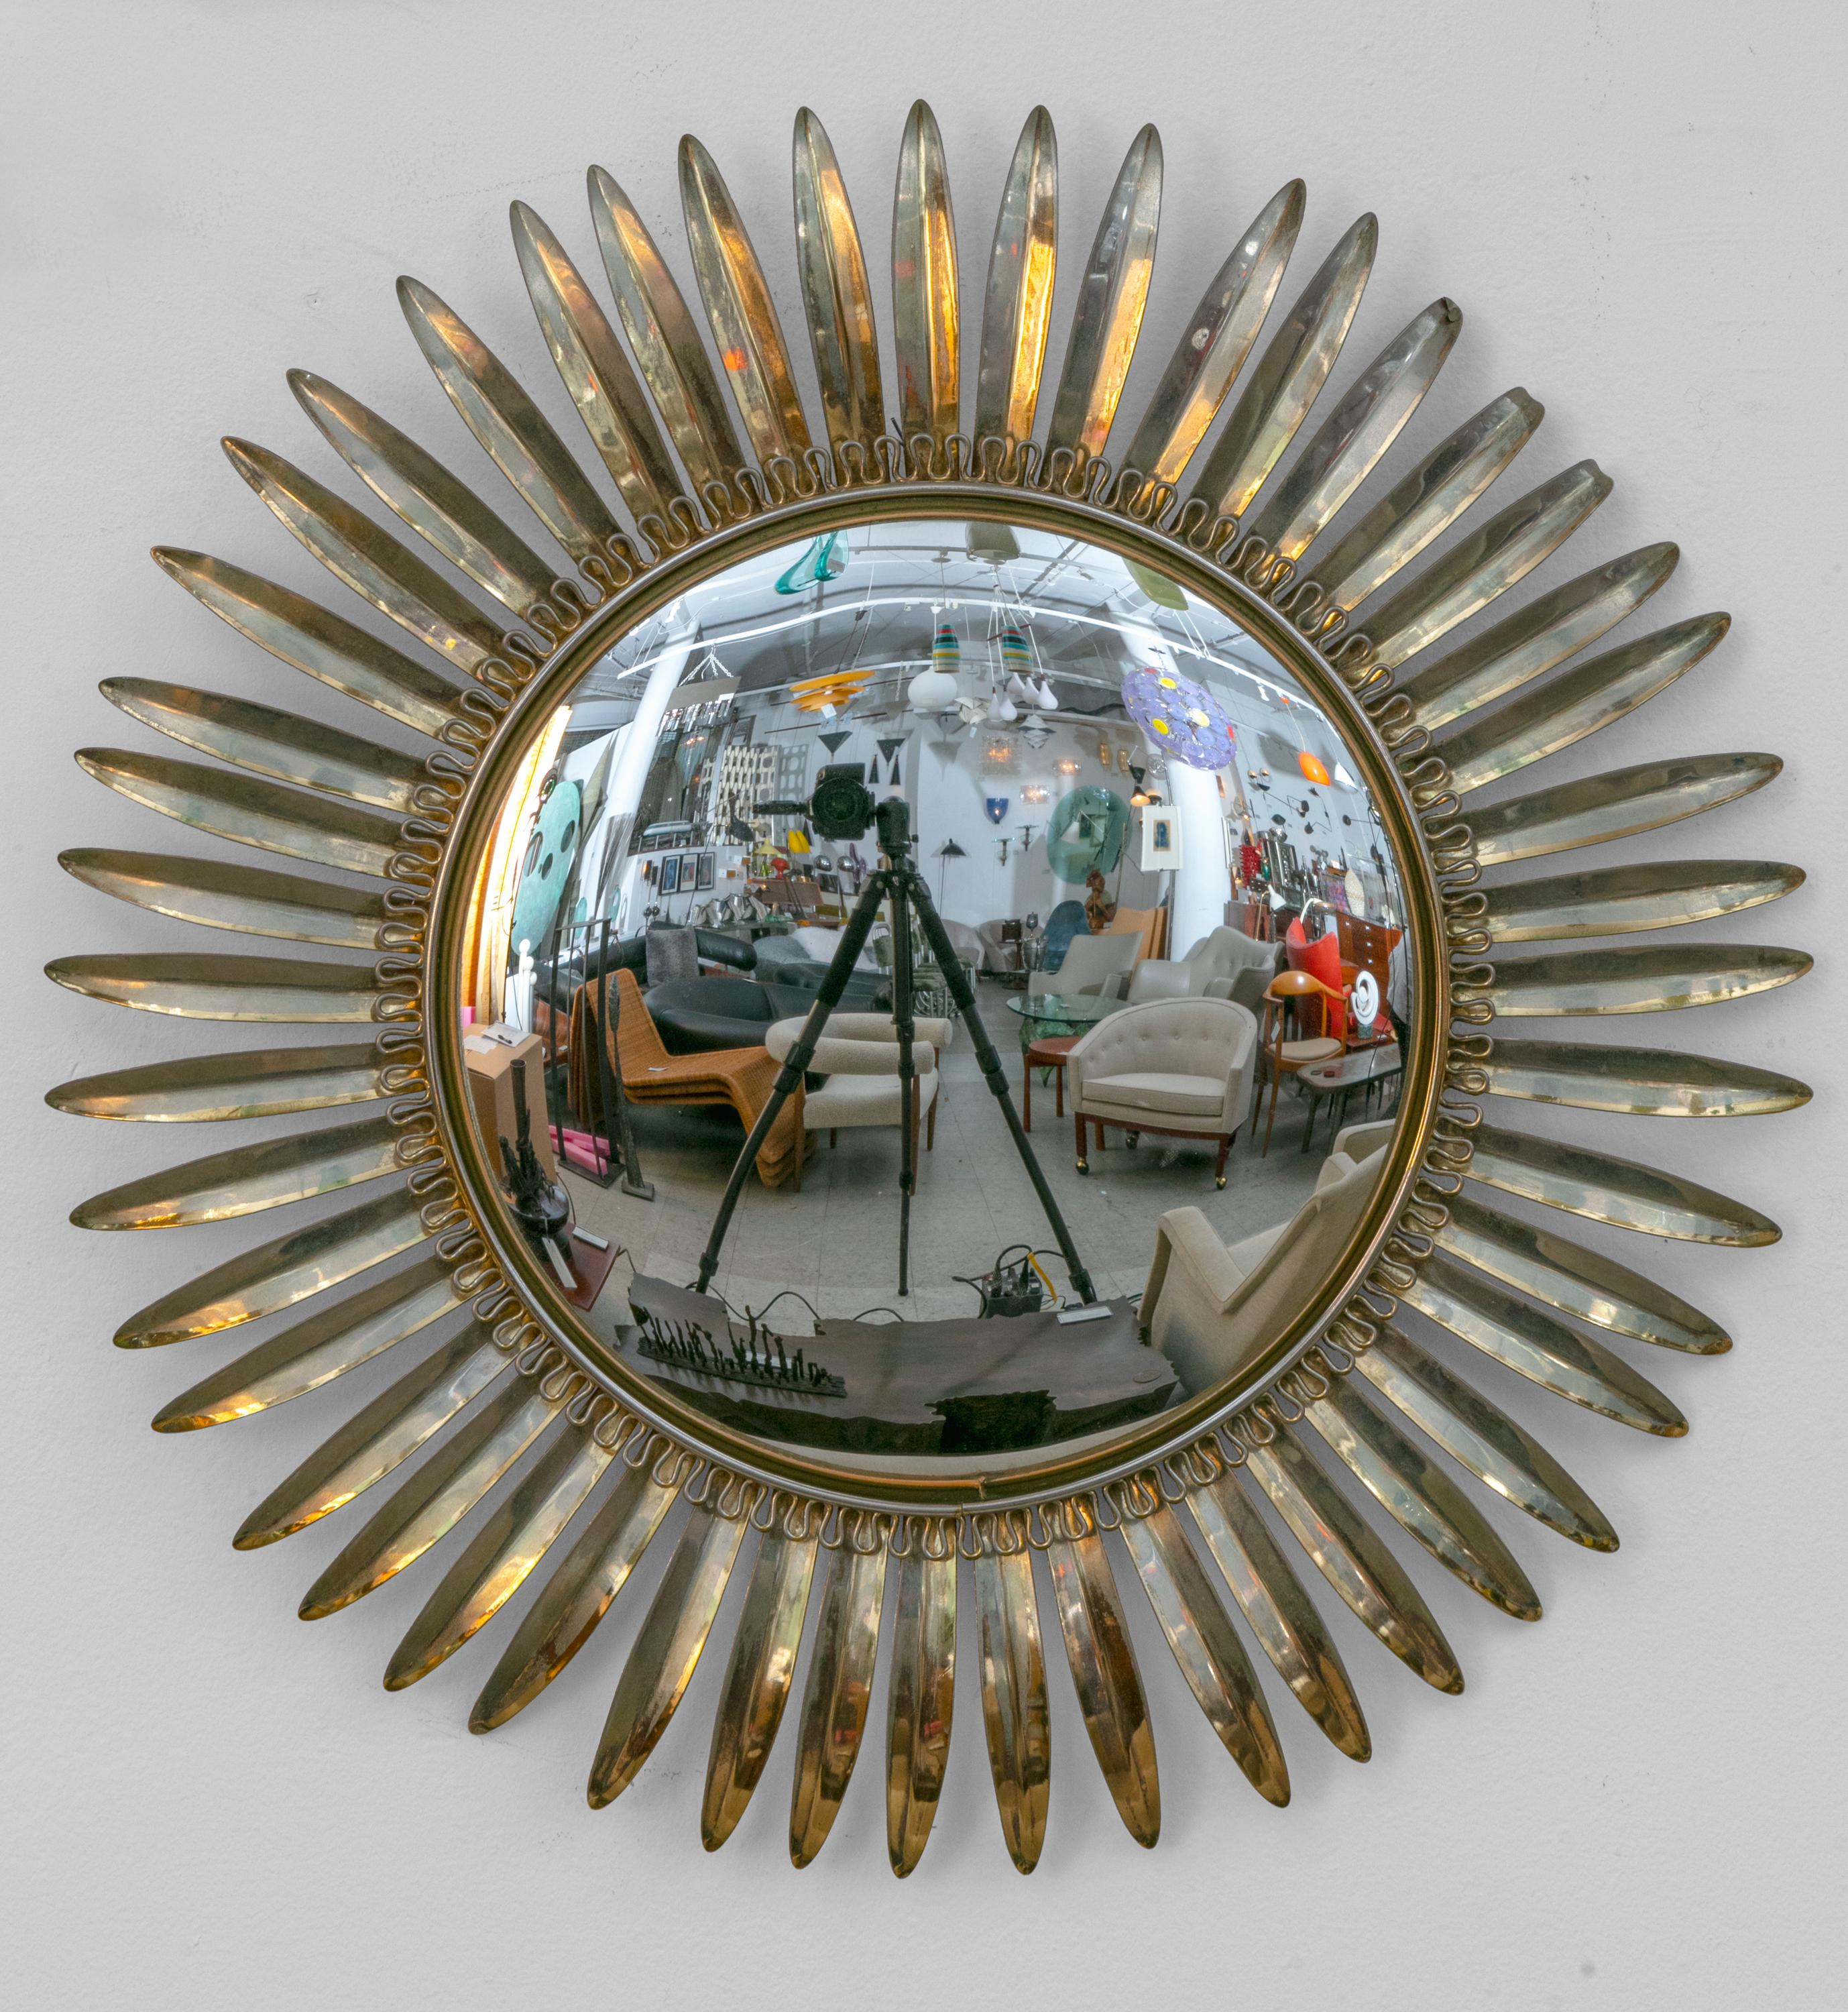 A pair of quintessential midcentury starburst mirrors with a decorative border surrounding the mirror.